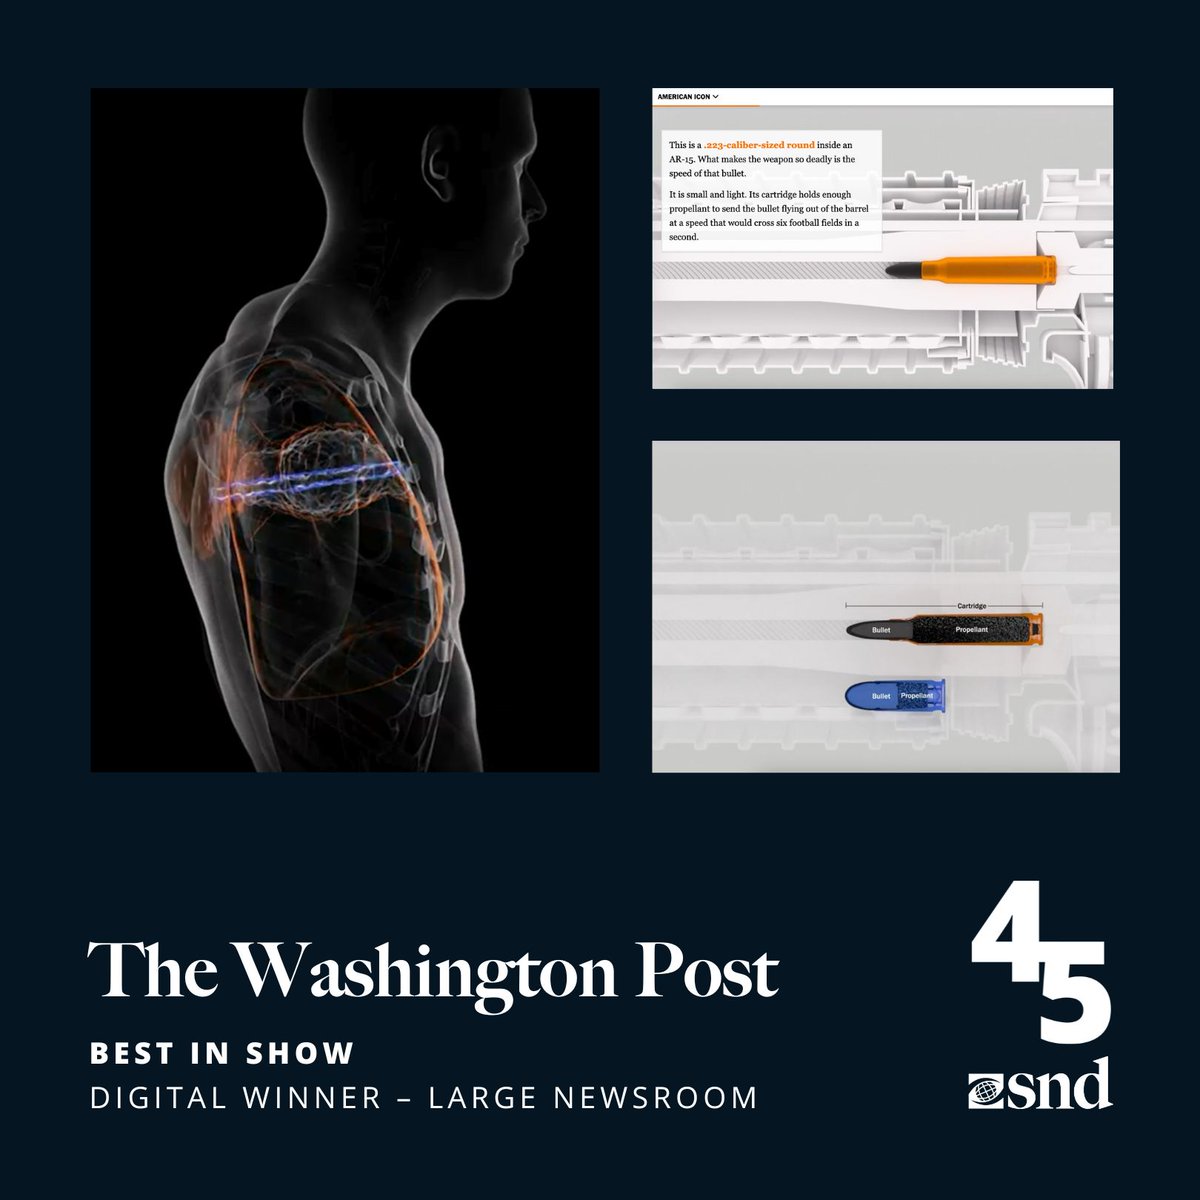 Digital: Large Newsroom @washingtonpost | The Blast Effect Judges said: This entry impressed judges with its purposeful and informative use of 3D graphics, along with the extensive research evident in the storytelling.